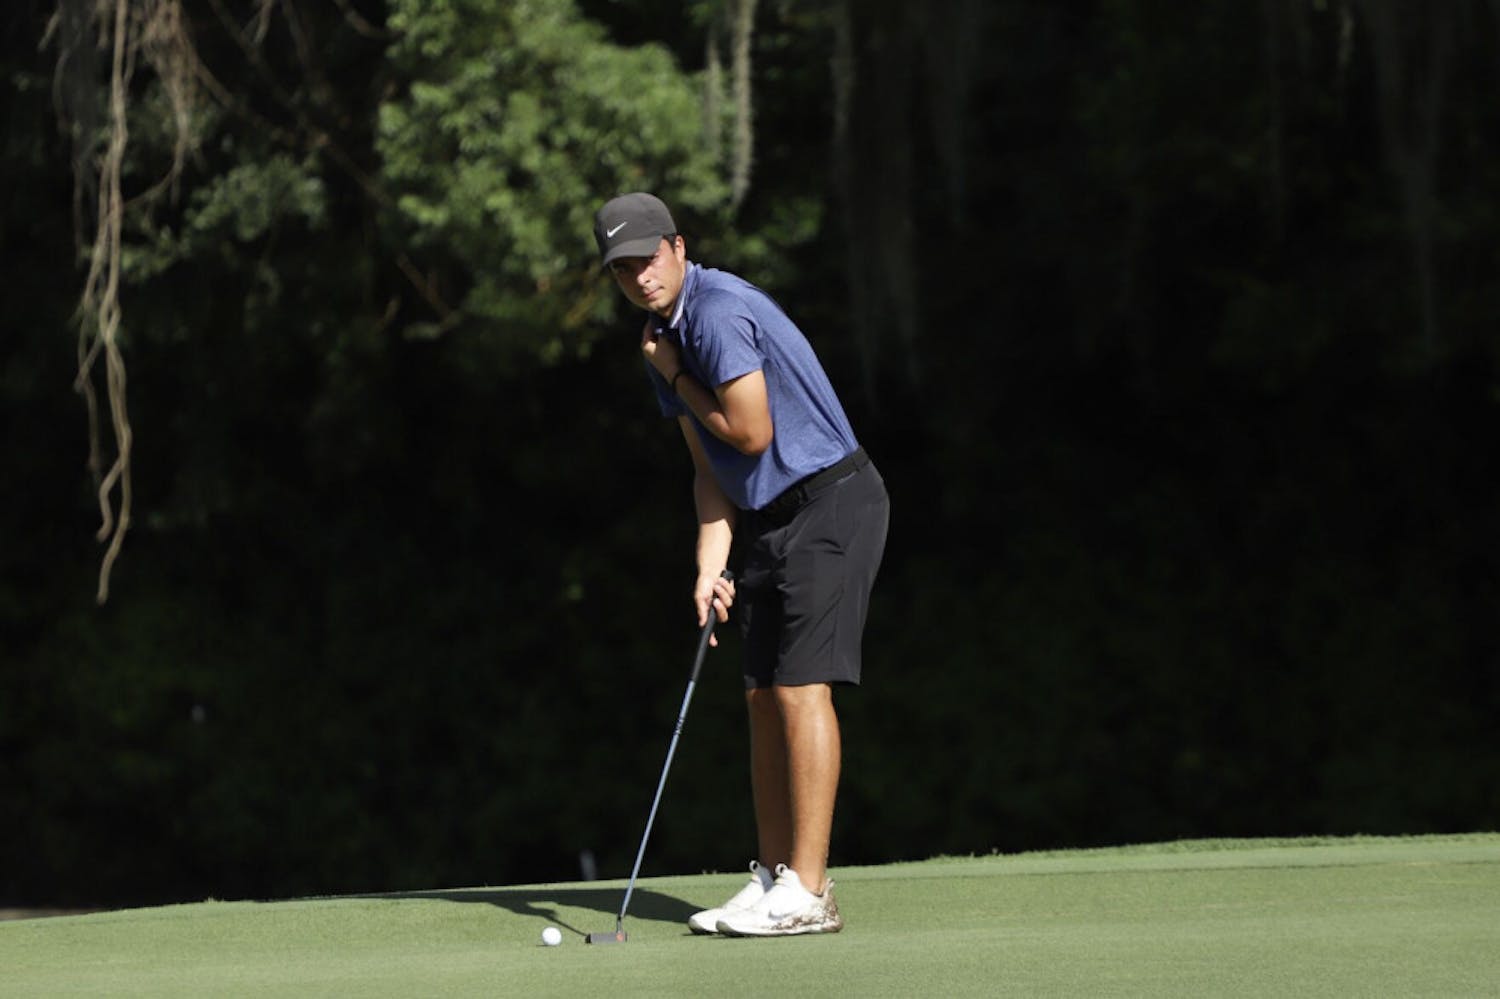 Fred Biondi shot a team-best 6-under-par 64 in the final round of the Ben Hogan Collegiate Tuesday. The Florida men&#x27;s golf team finished ninth in the event. ﻿